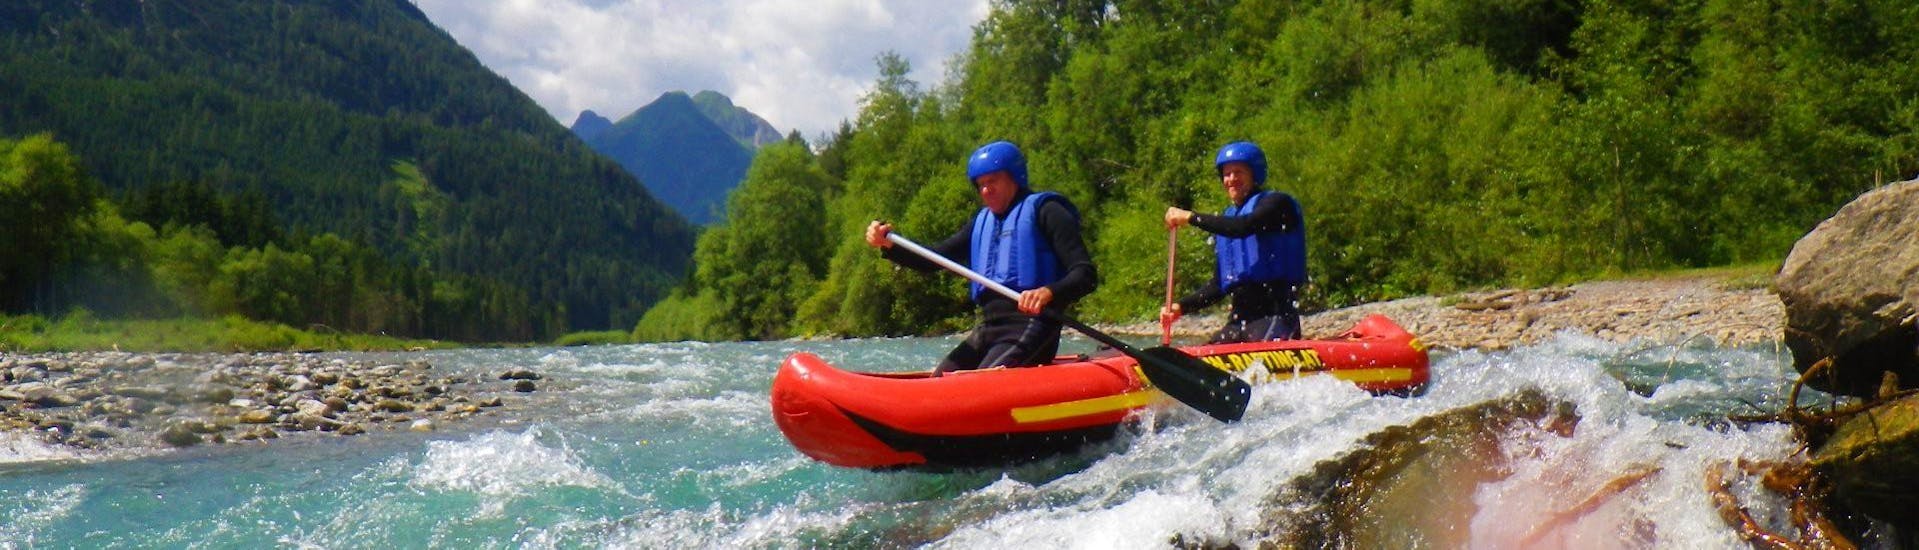 Two participants of the Canoe Rafting on the Lech River - Full Day Tour with BBQ organized by Fun Rafting Lechtal are mastering a rapid on the river in their inflatable canoe.